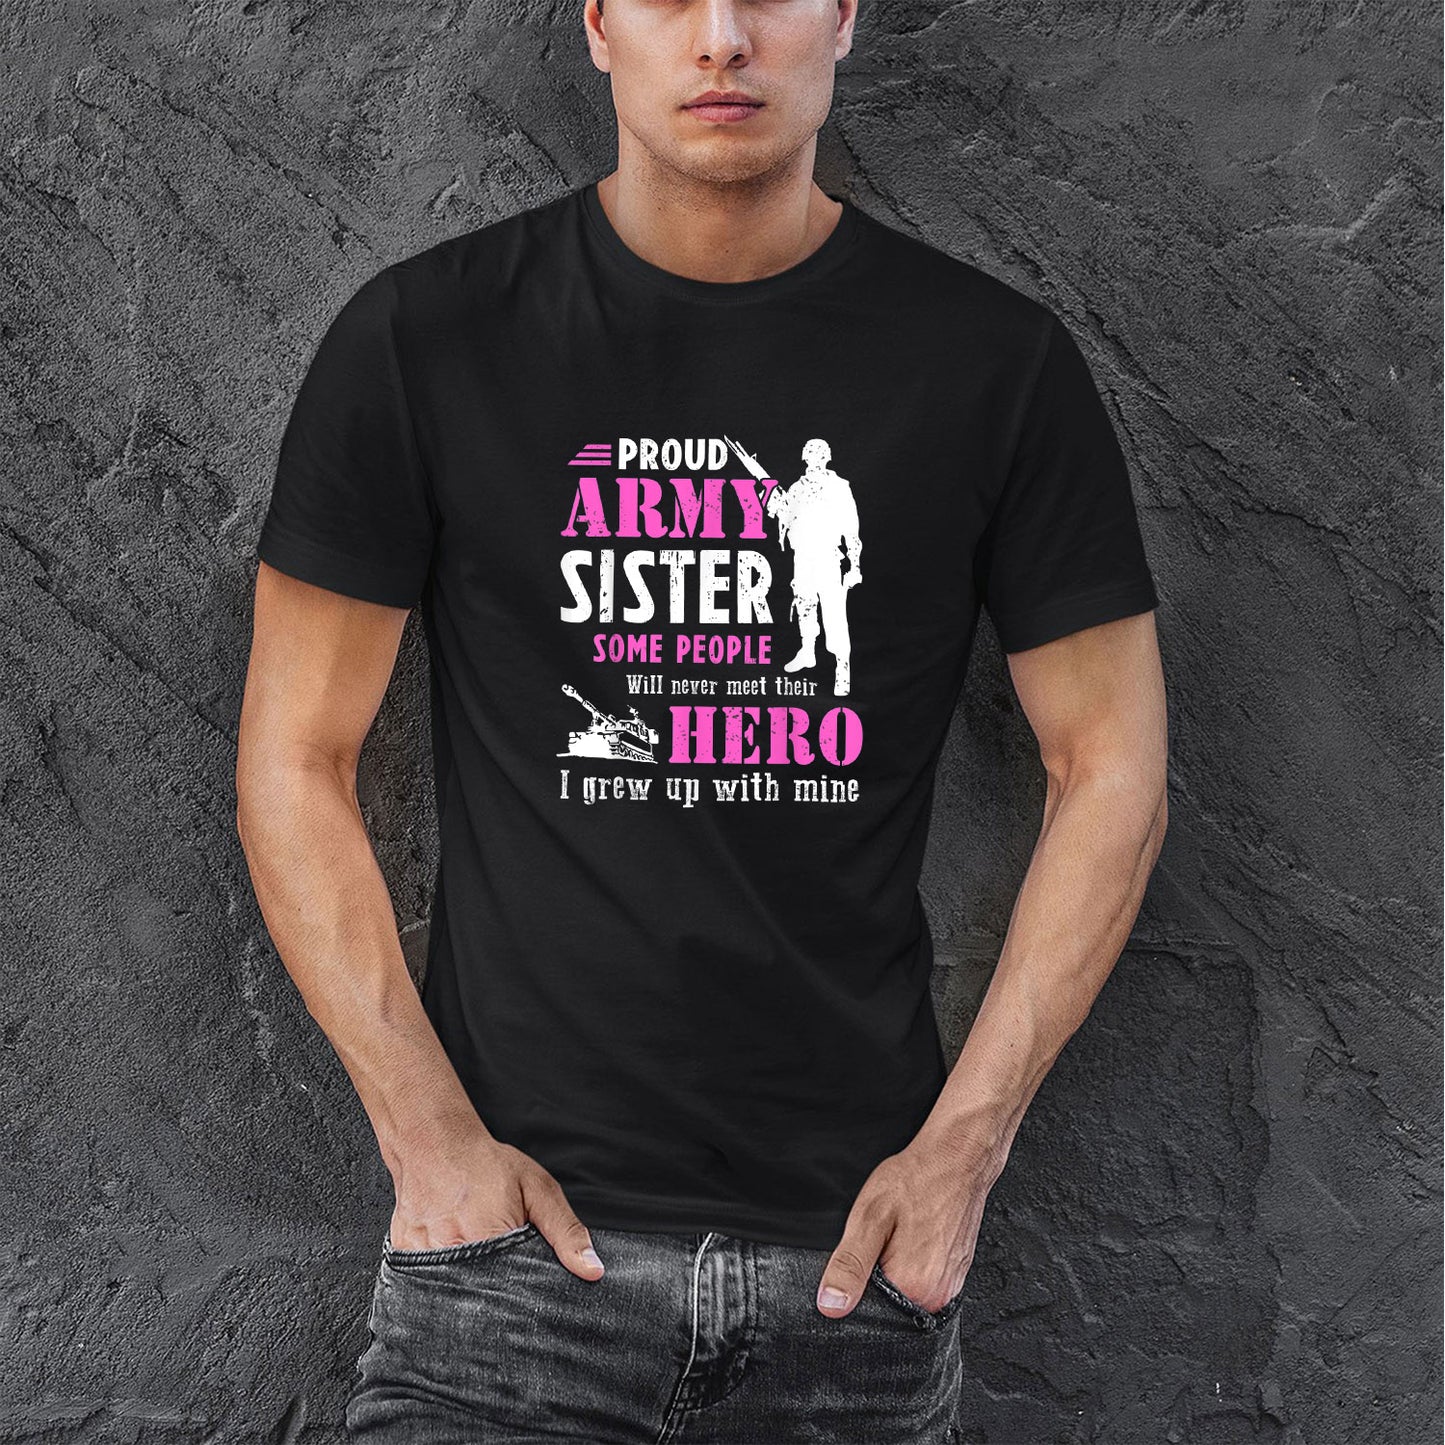 Memorial Day 2021 Proud Sister Of A Us Marine Shirt, Proud Army Sister Some People Never Meet Their Hero Shirt For Men, Cotton Shirt, Air Force Memorial Shirt, Usaf T Shirt